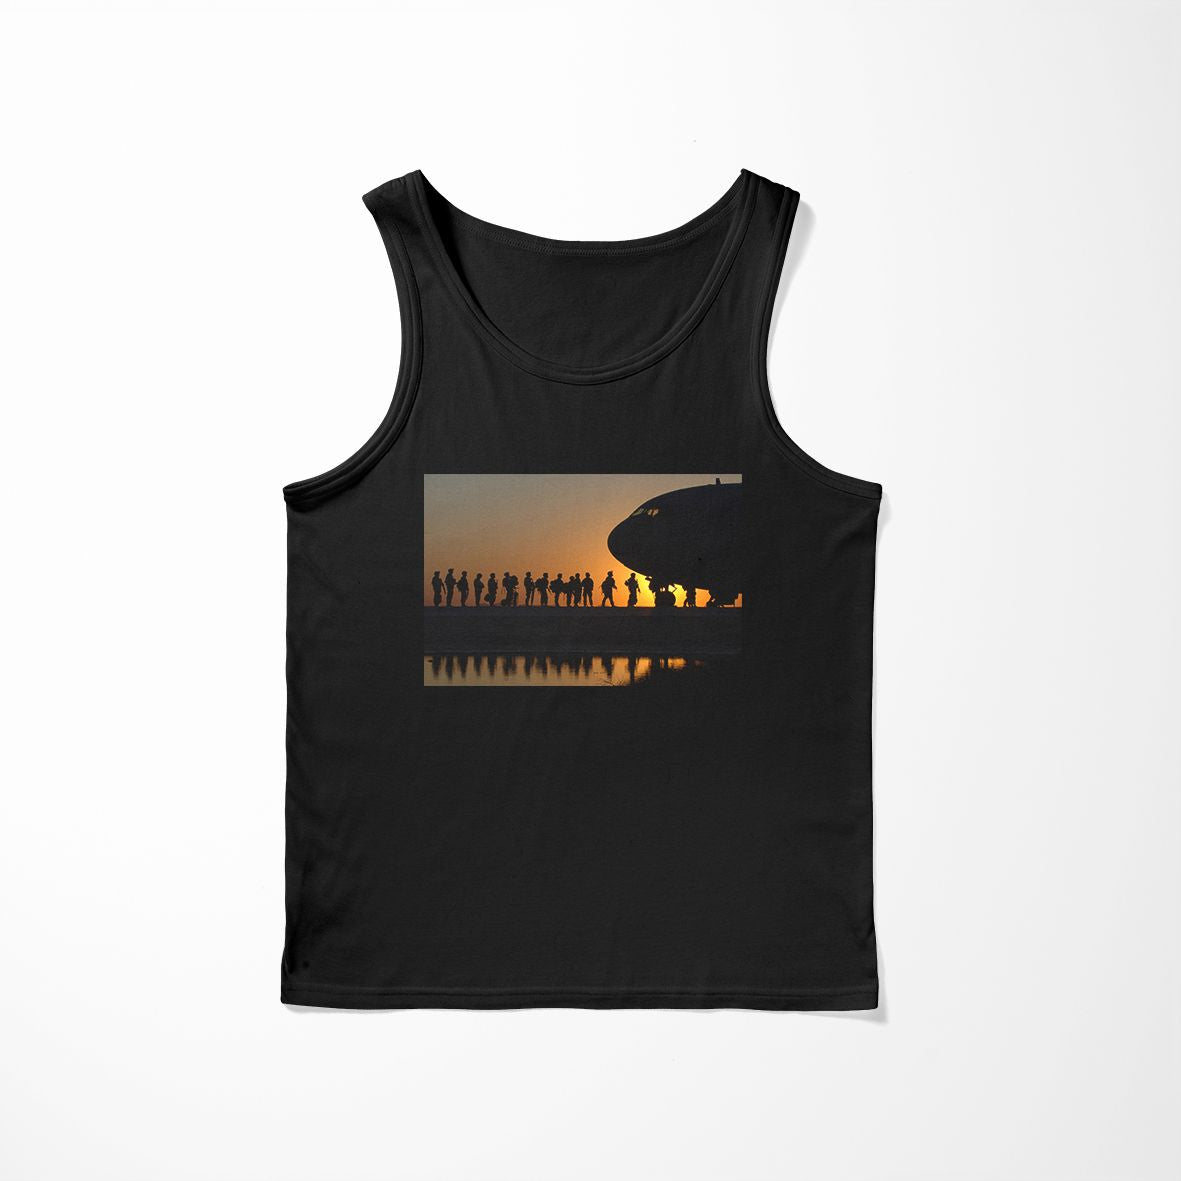 Band of Brothers Theme Soldiers Designed Tank Tops